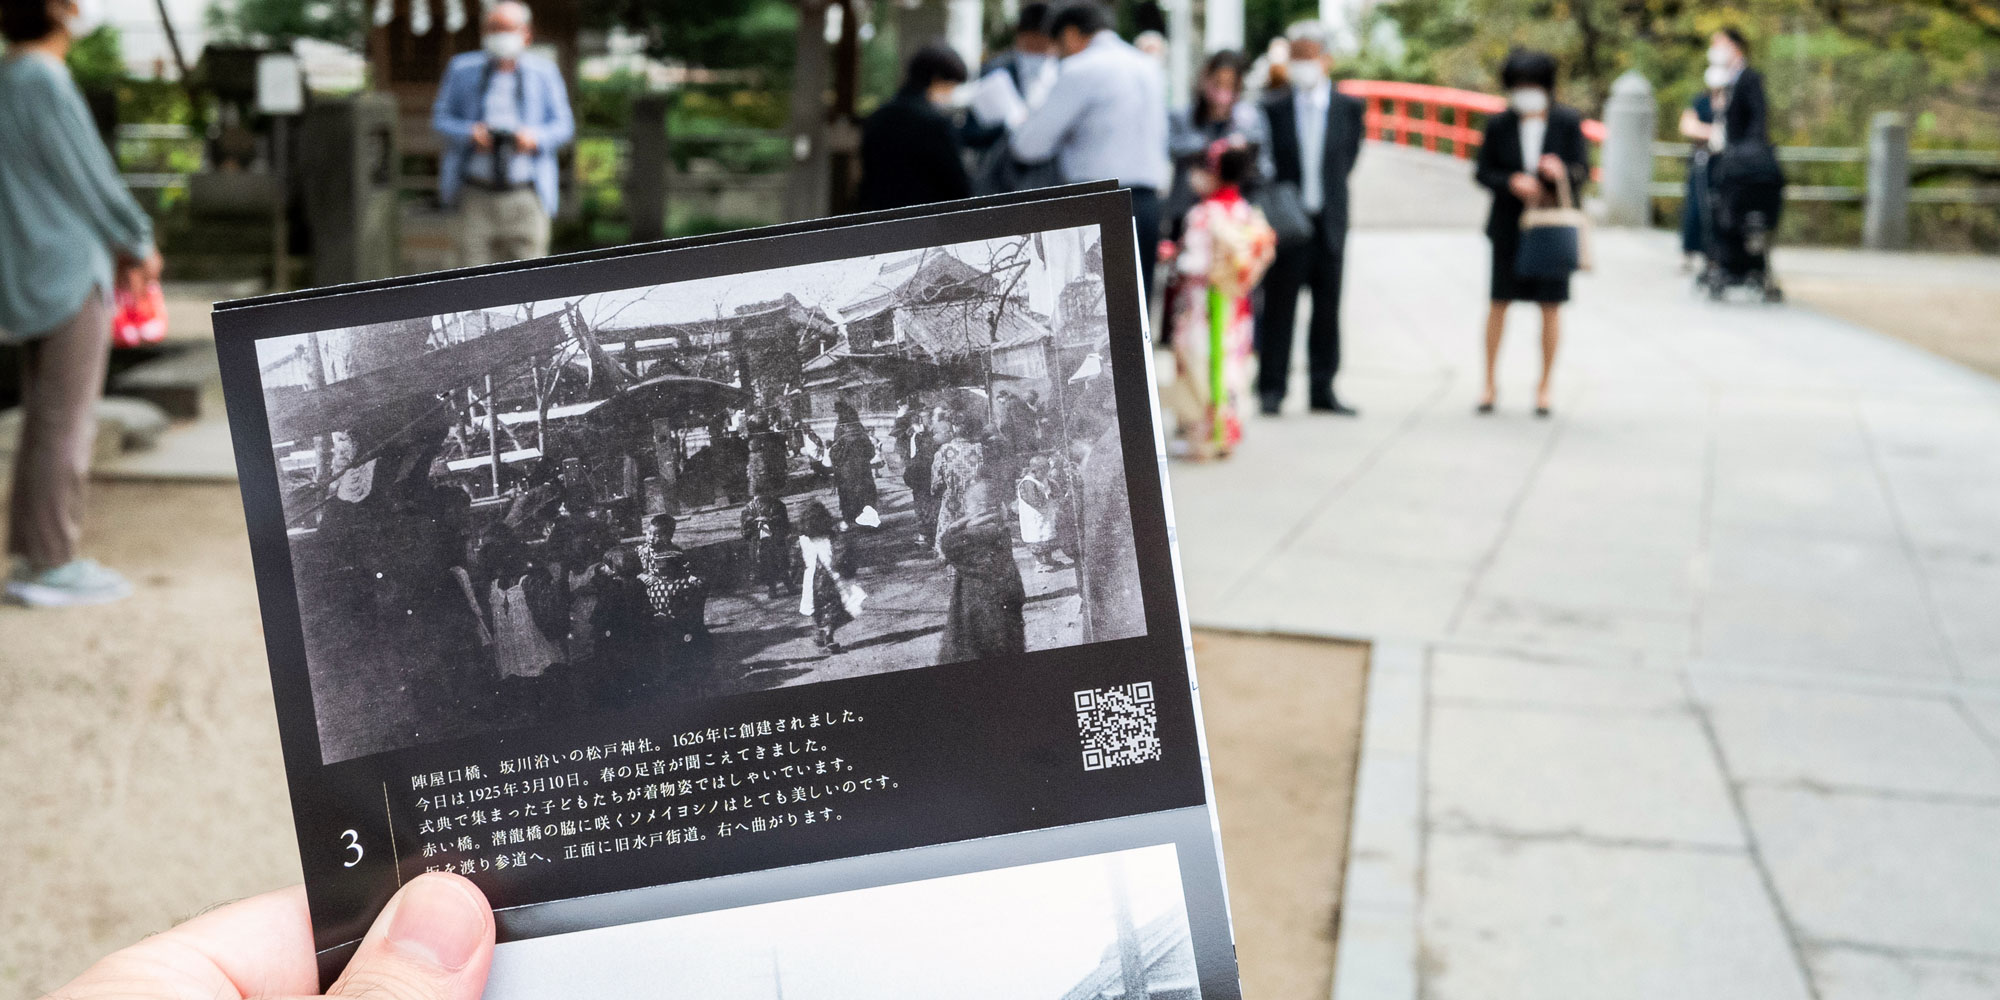 During the festival, visitors explored the city and the creative catalysts with a map and “memories of the city,” a sealed envelope containing historic photographs.